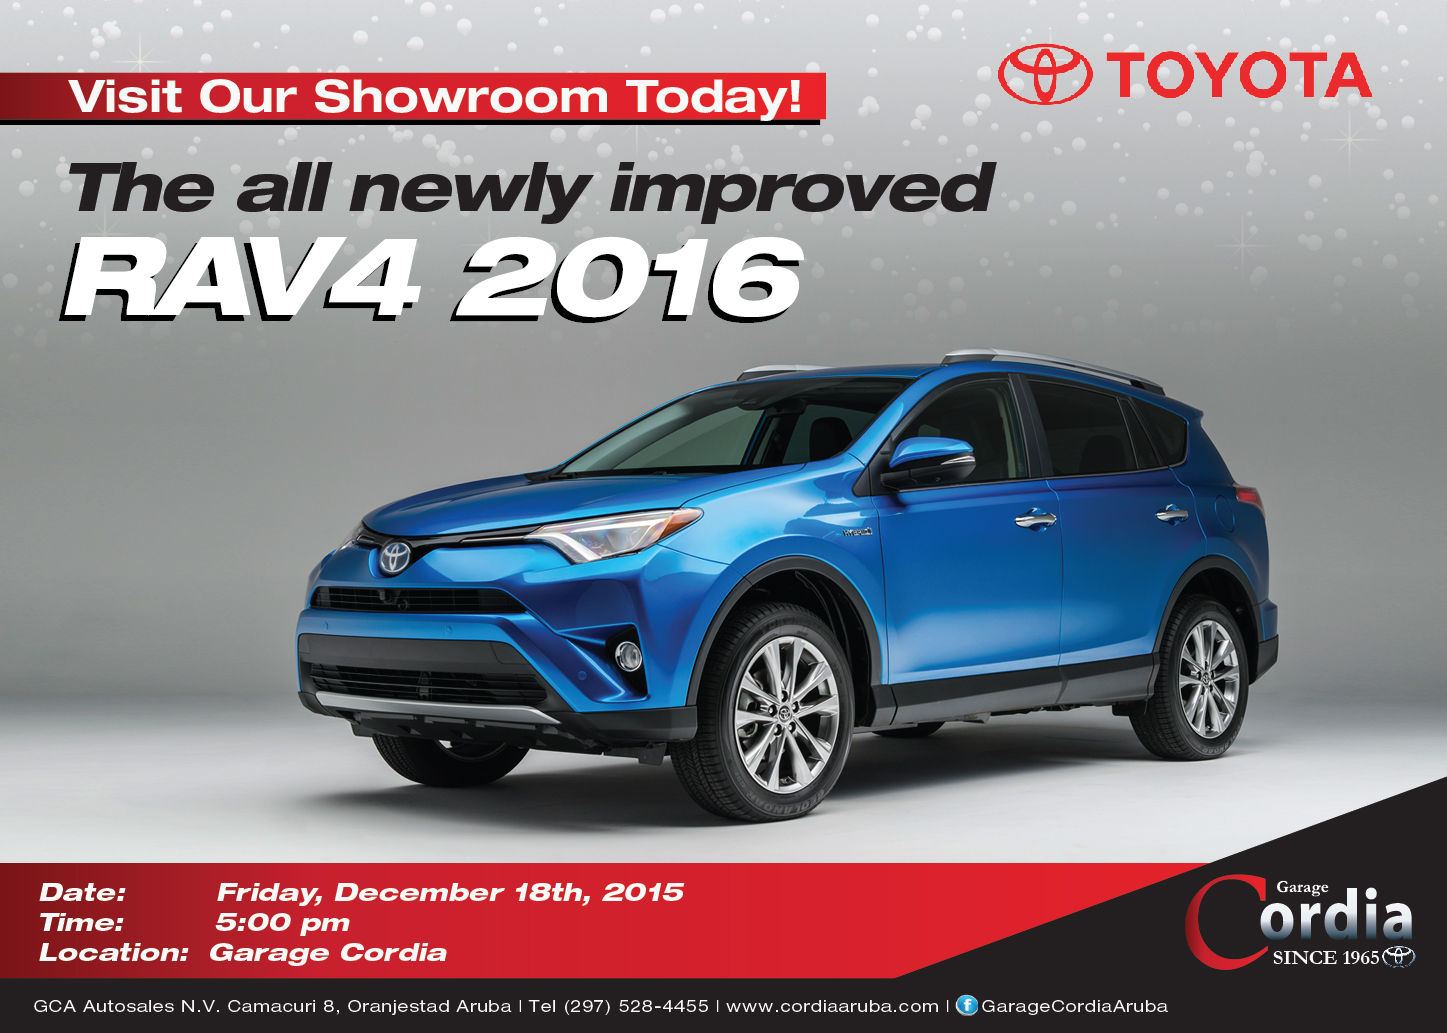 Unveiling of the All Newly Improved RAV4 2016